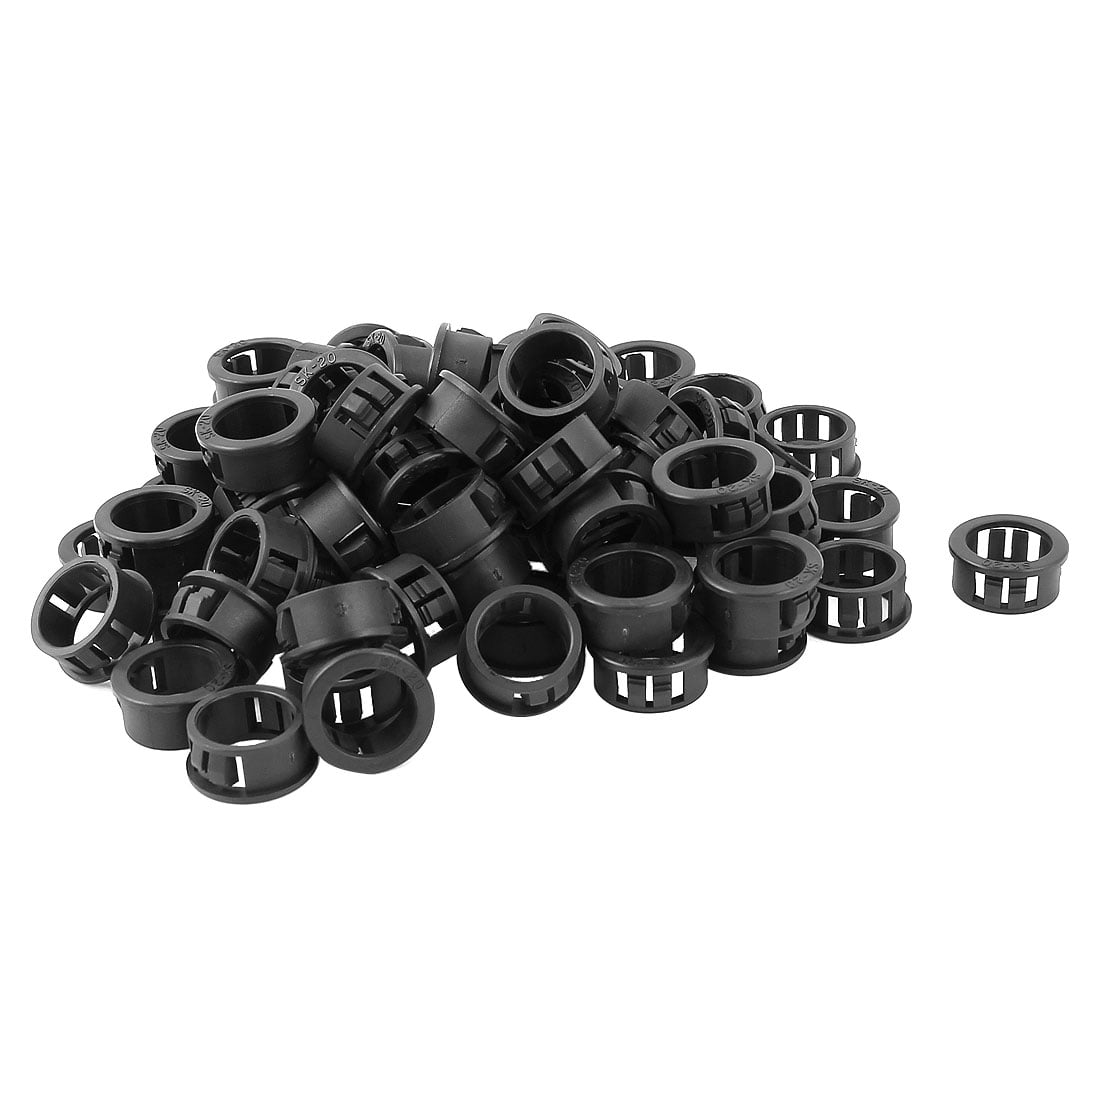 Fielect Cable Hose Snap Bushing Grommet Protector 40Pcs EHR-22 22mm Mounted Dia Locking Bushing Protective Grommet Black 